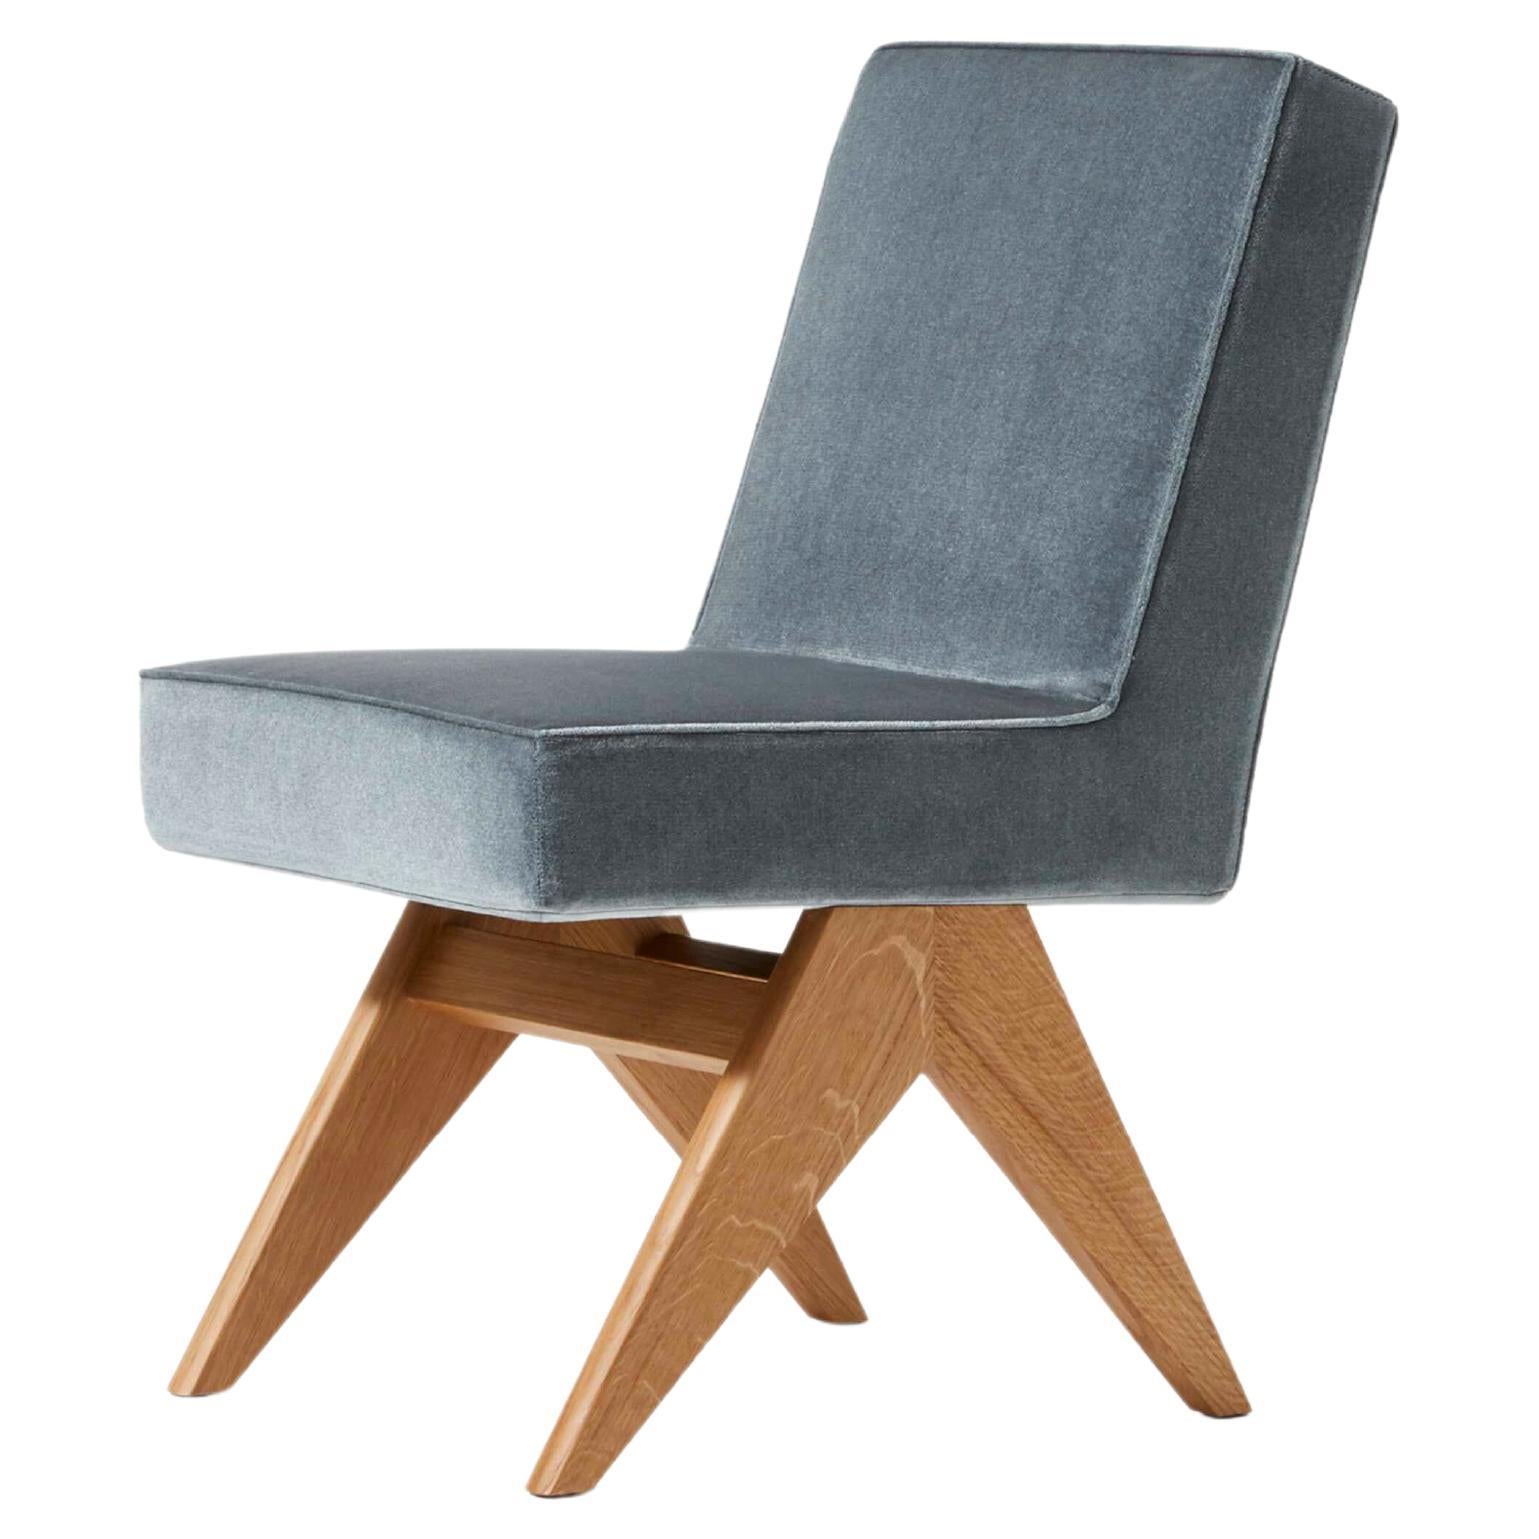 Pierre Jeanneret Committee Dining Chair for Cassina, Italy - New  en vente